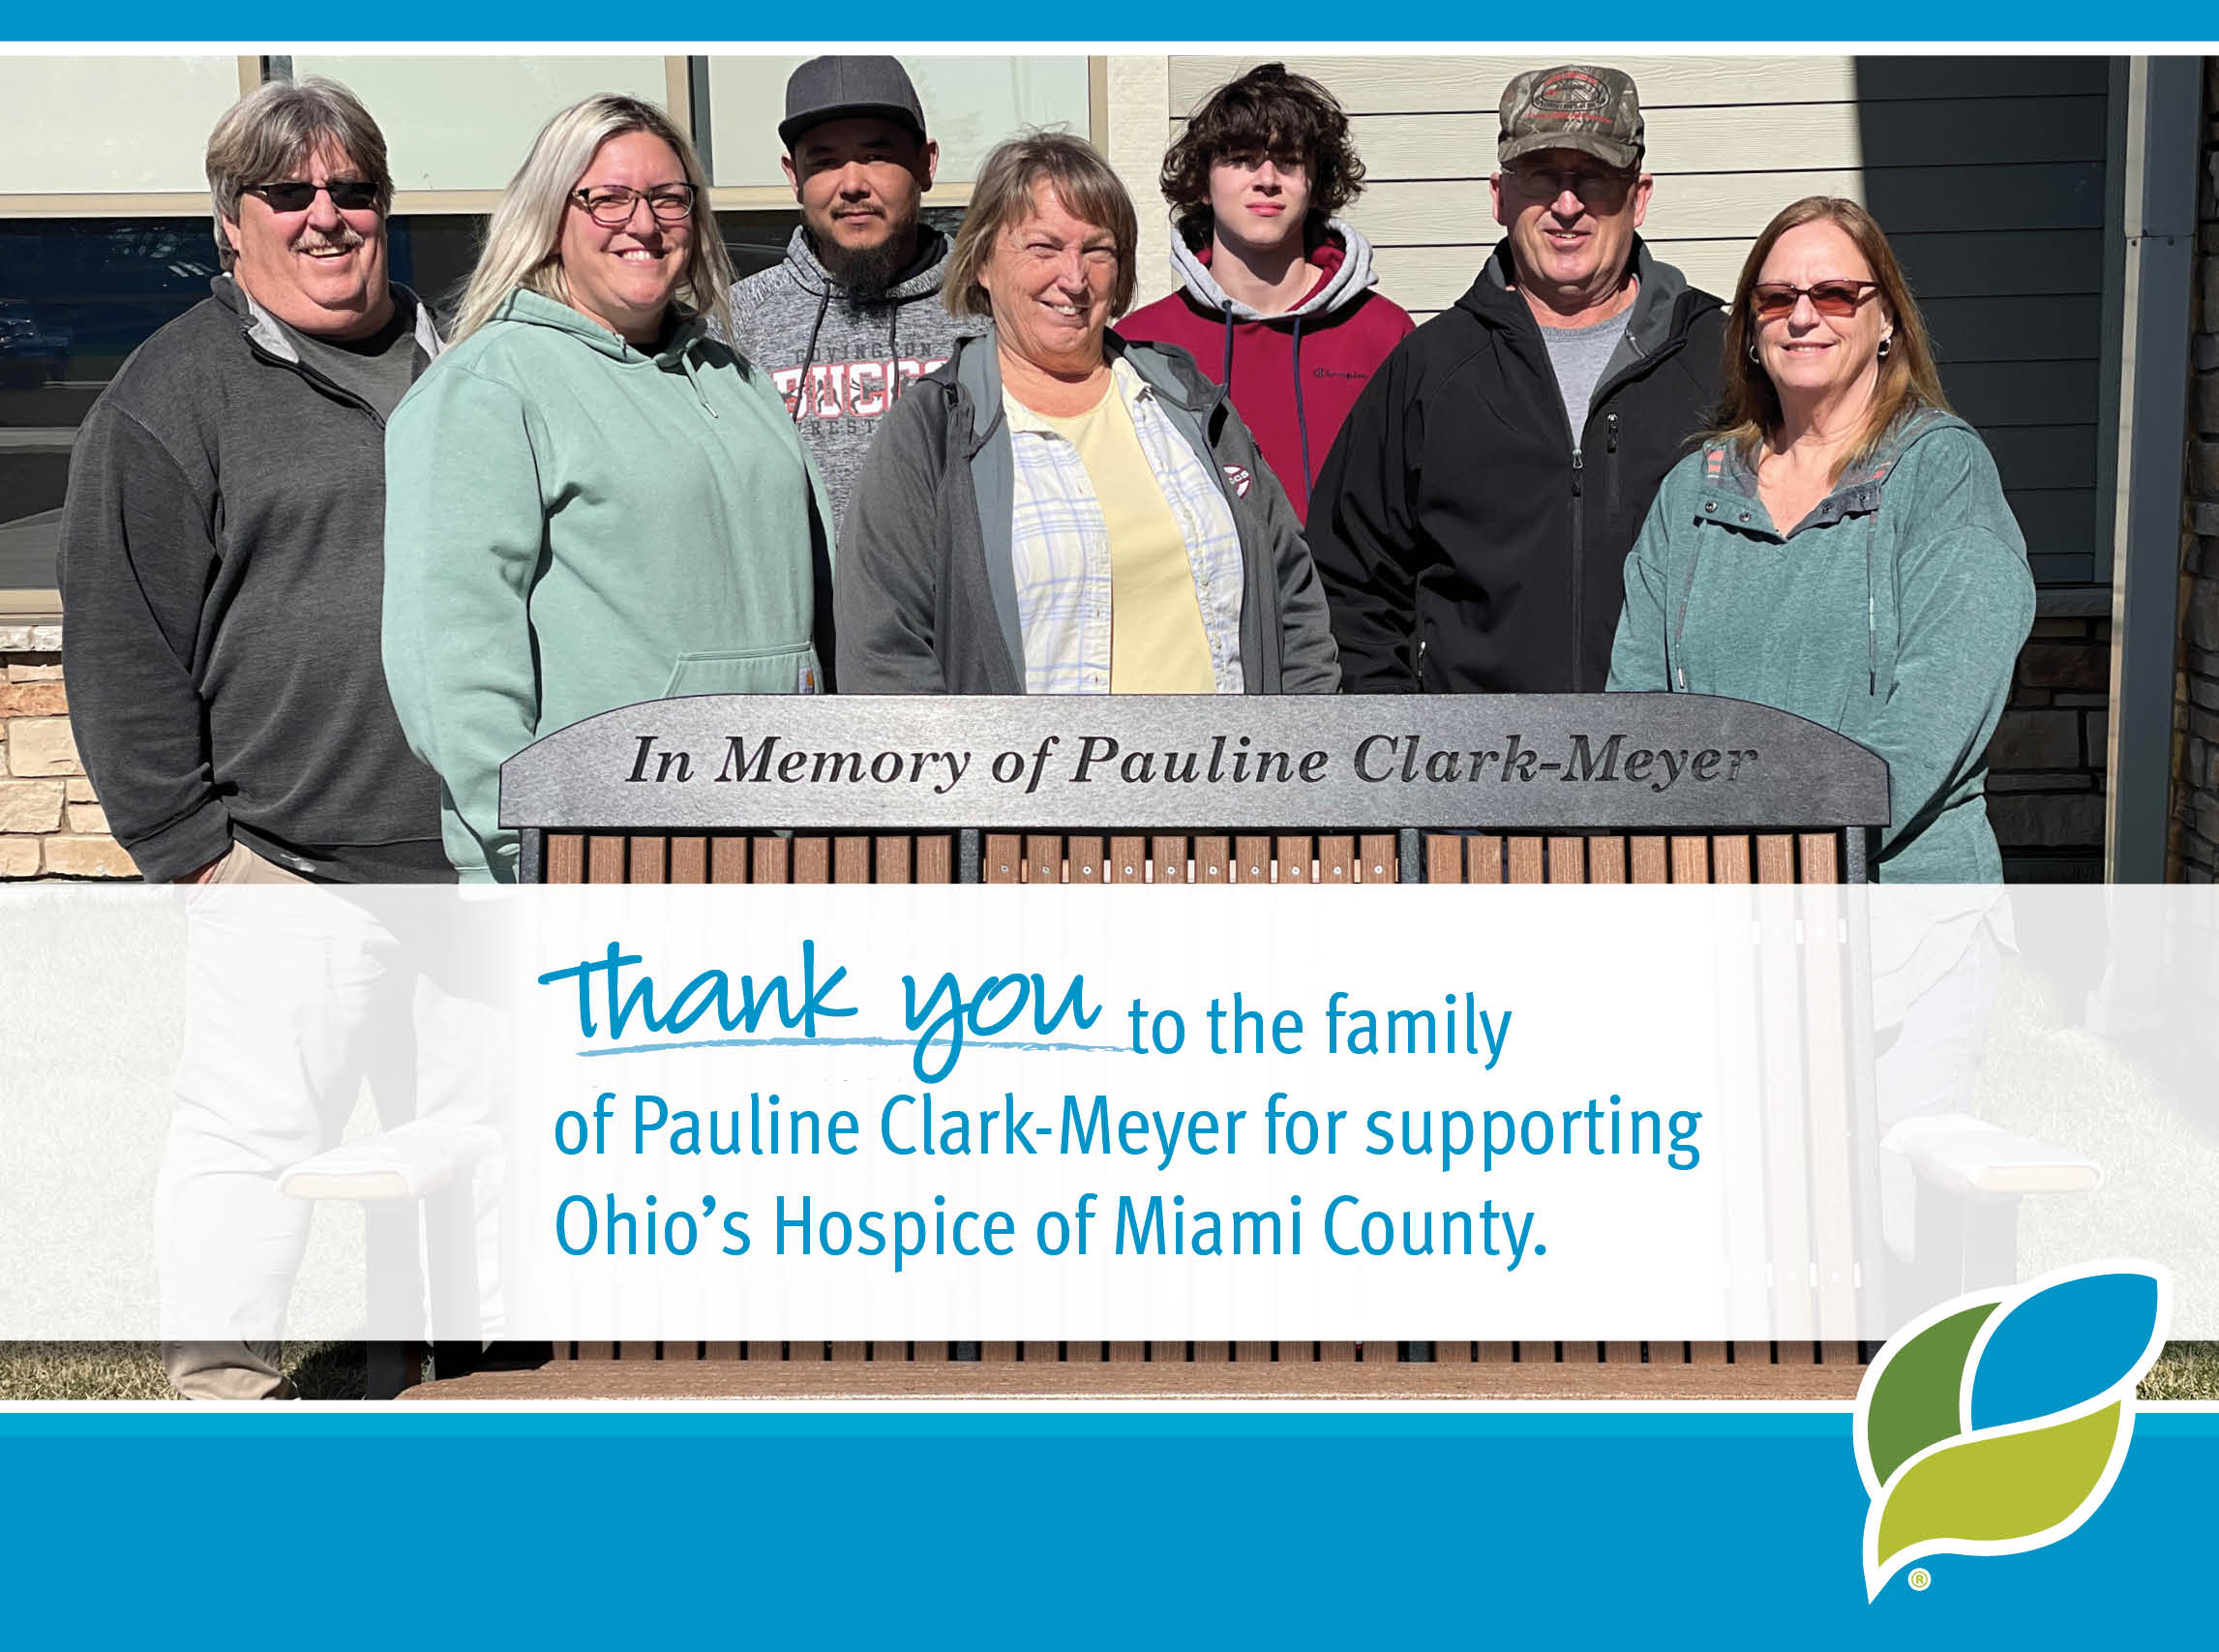 Thank you to the family of Pauline Clark-Meyer for supporting Ohio's Hospice of Miami County